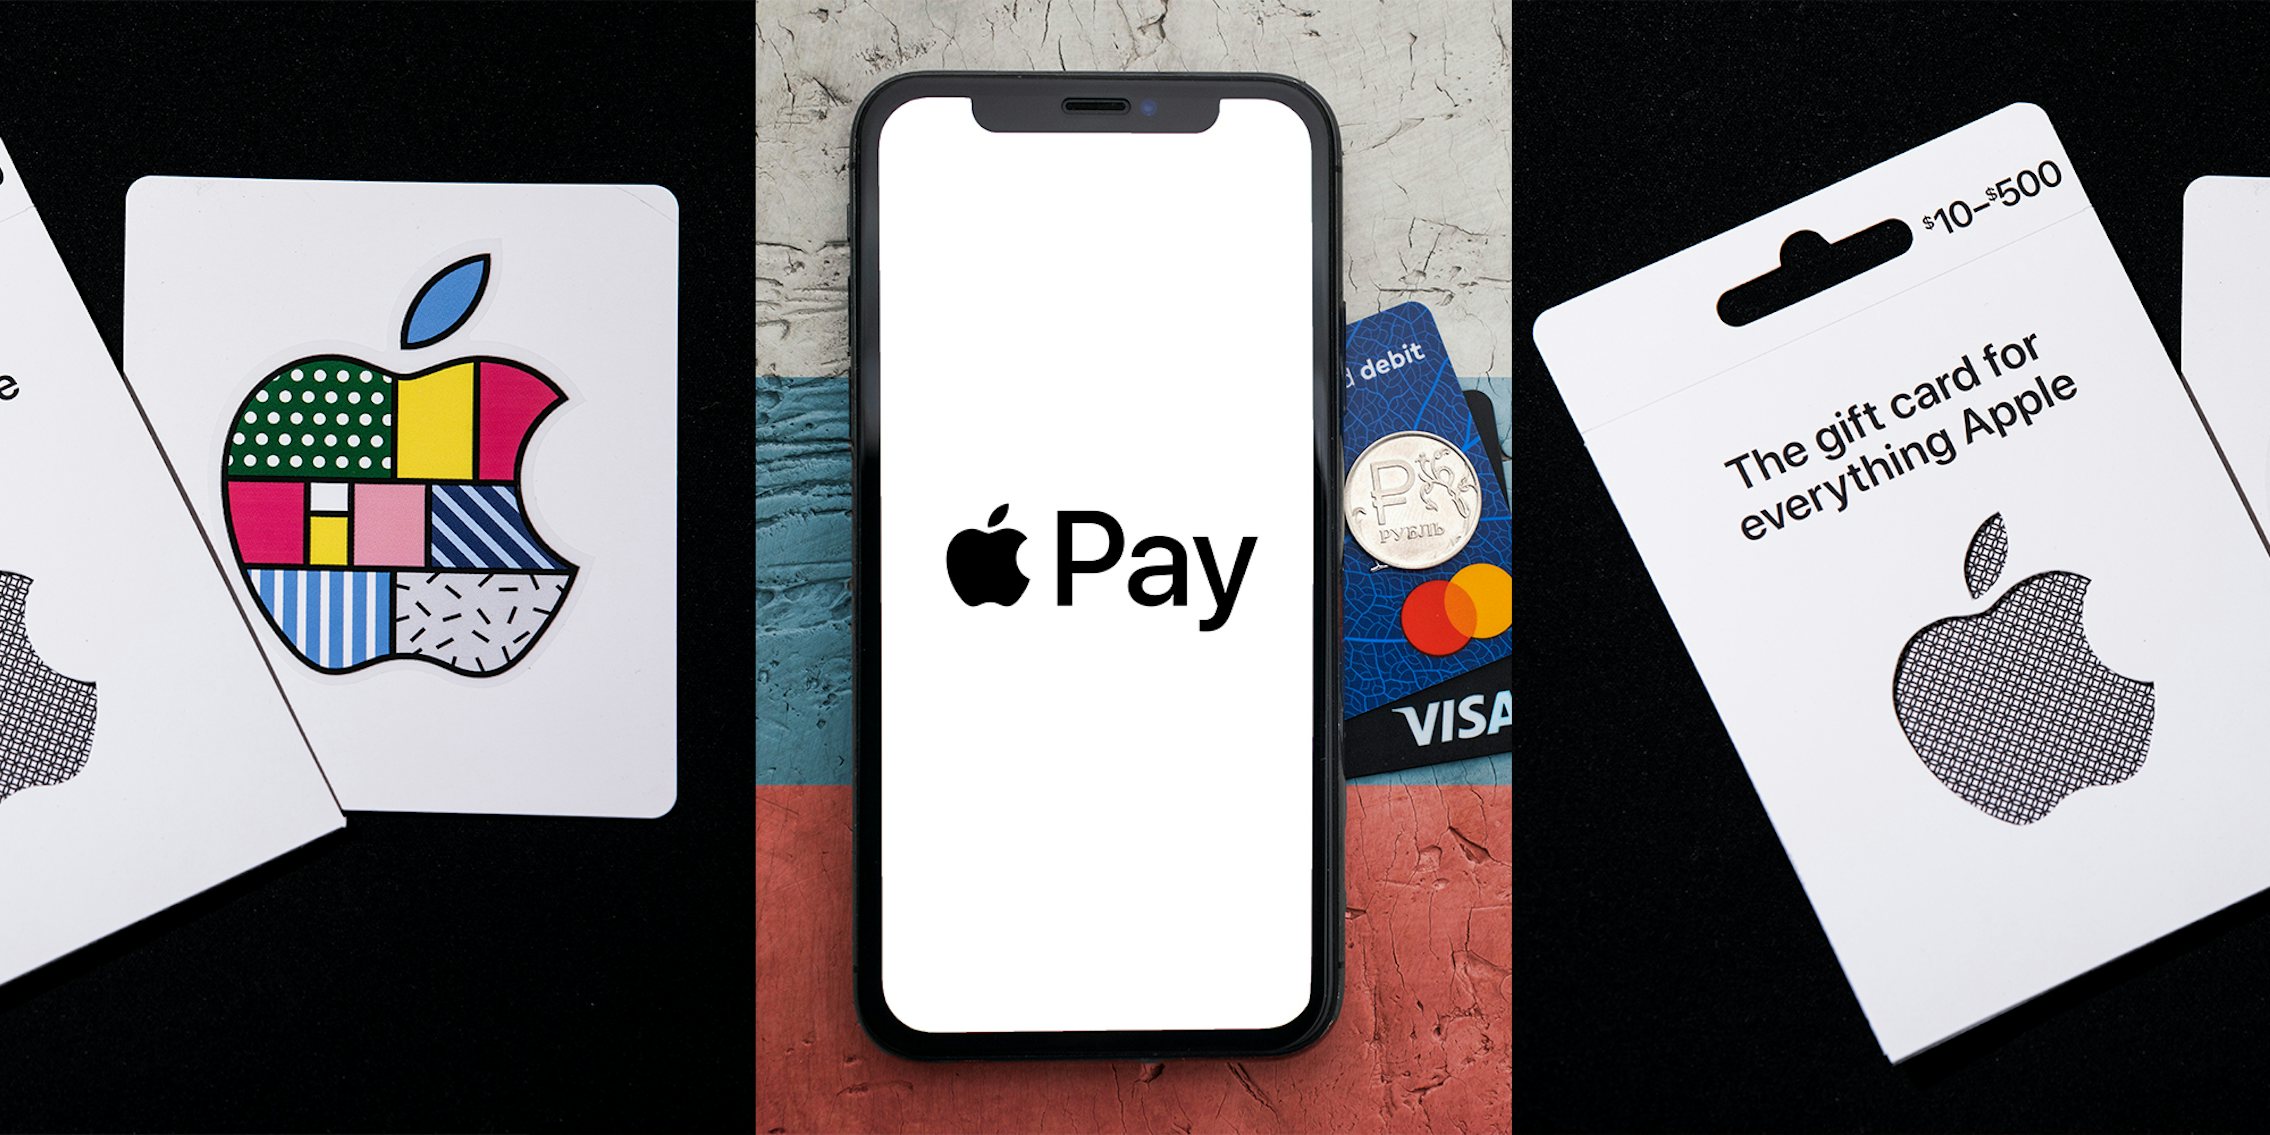 Apple Gift Cards; Everything You Need to Know - EZ PIN - Gift Card